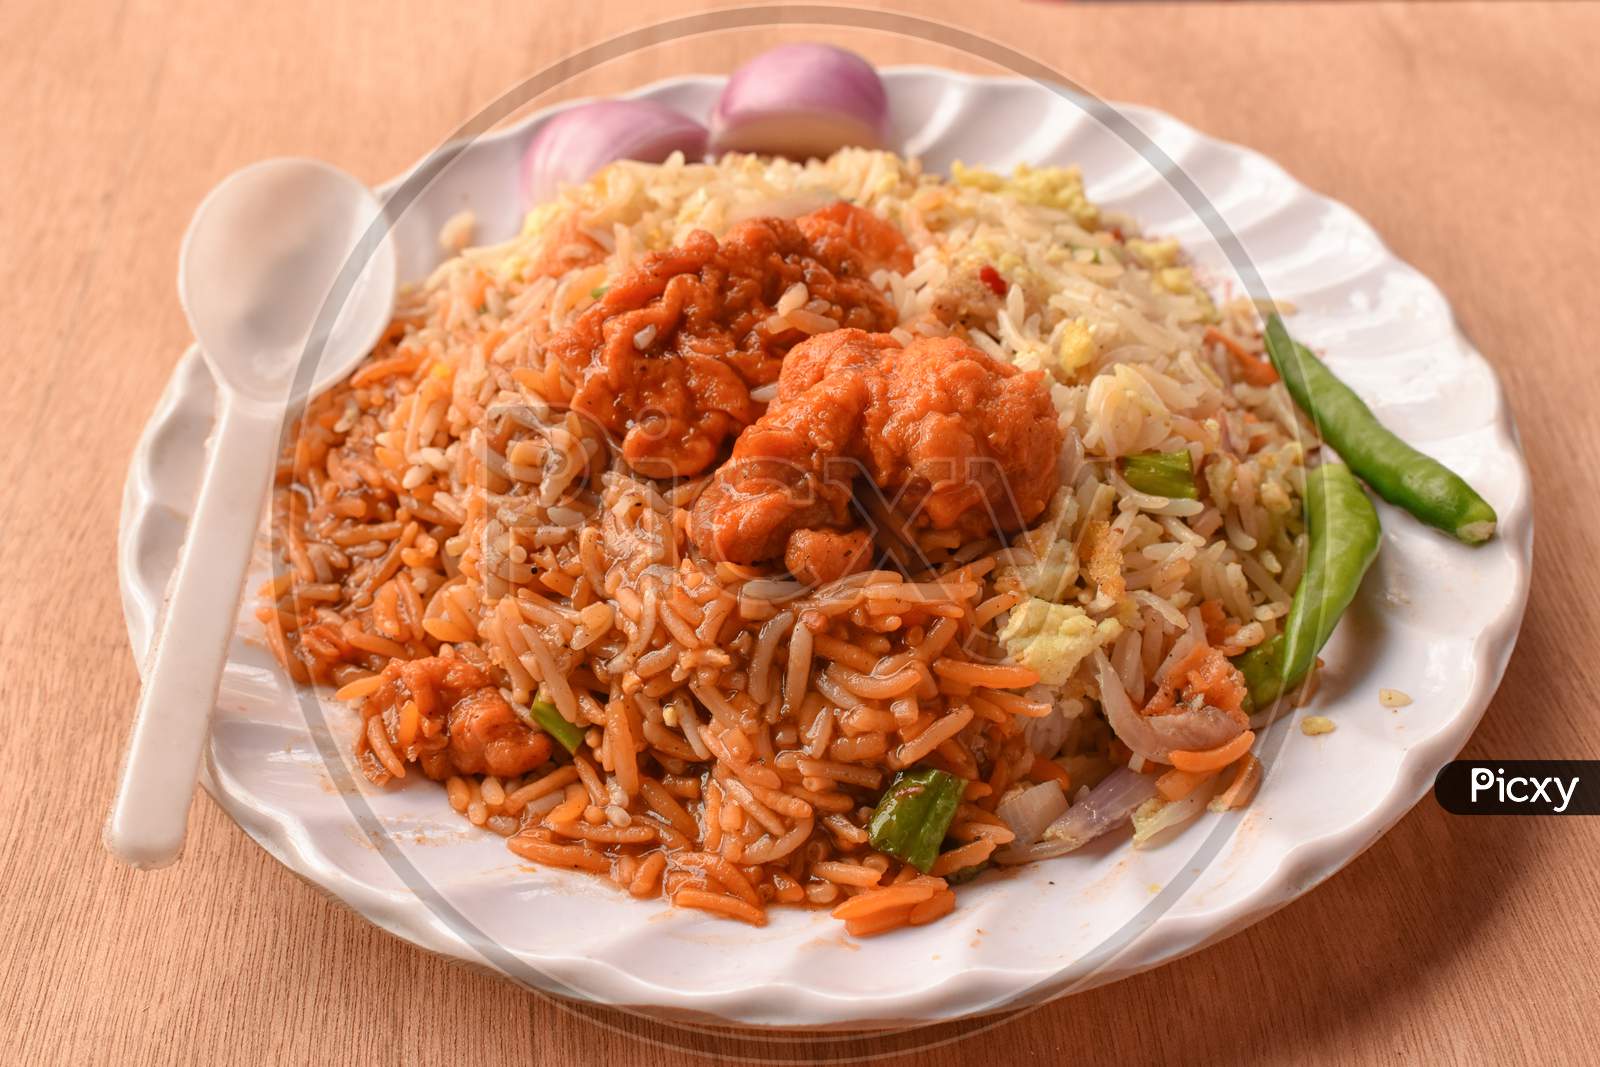 Chilli Chicken Is A Popular Indo-Chinese Appetizer Served With Vegetable Fried Rice.